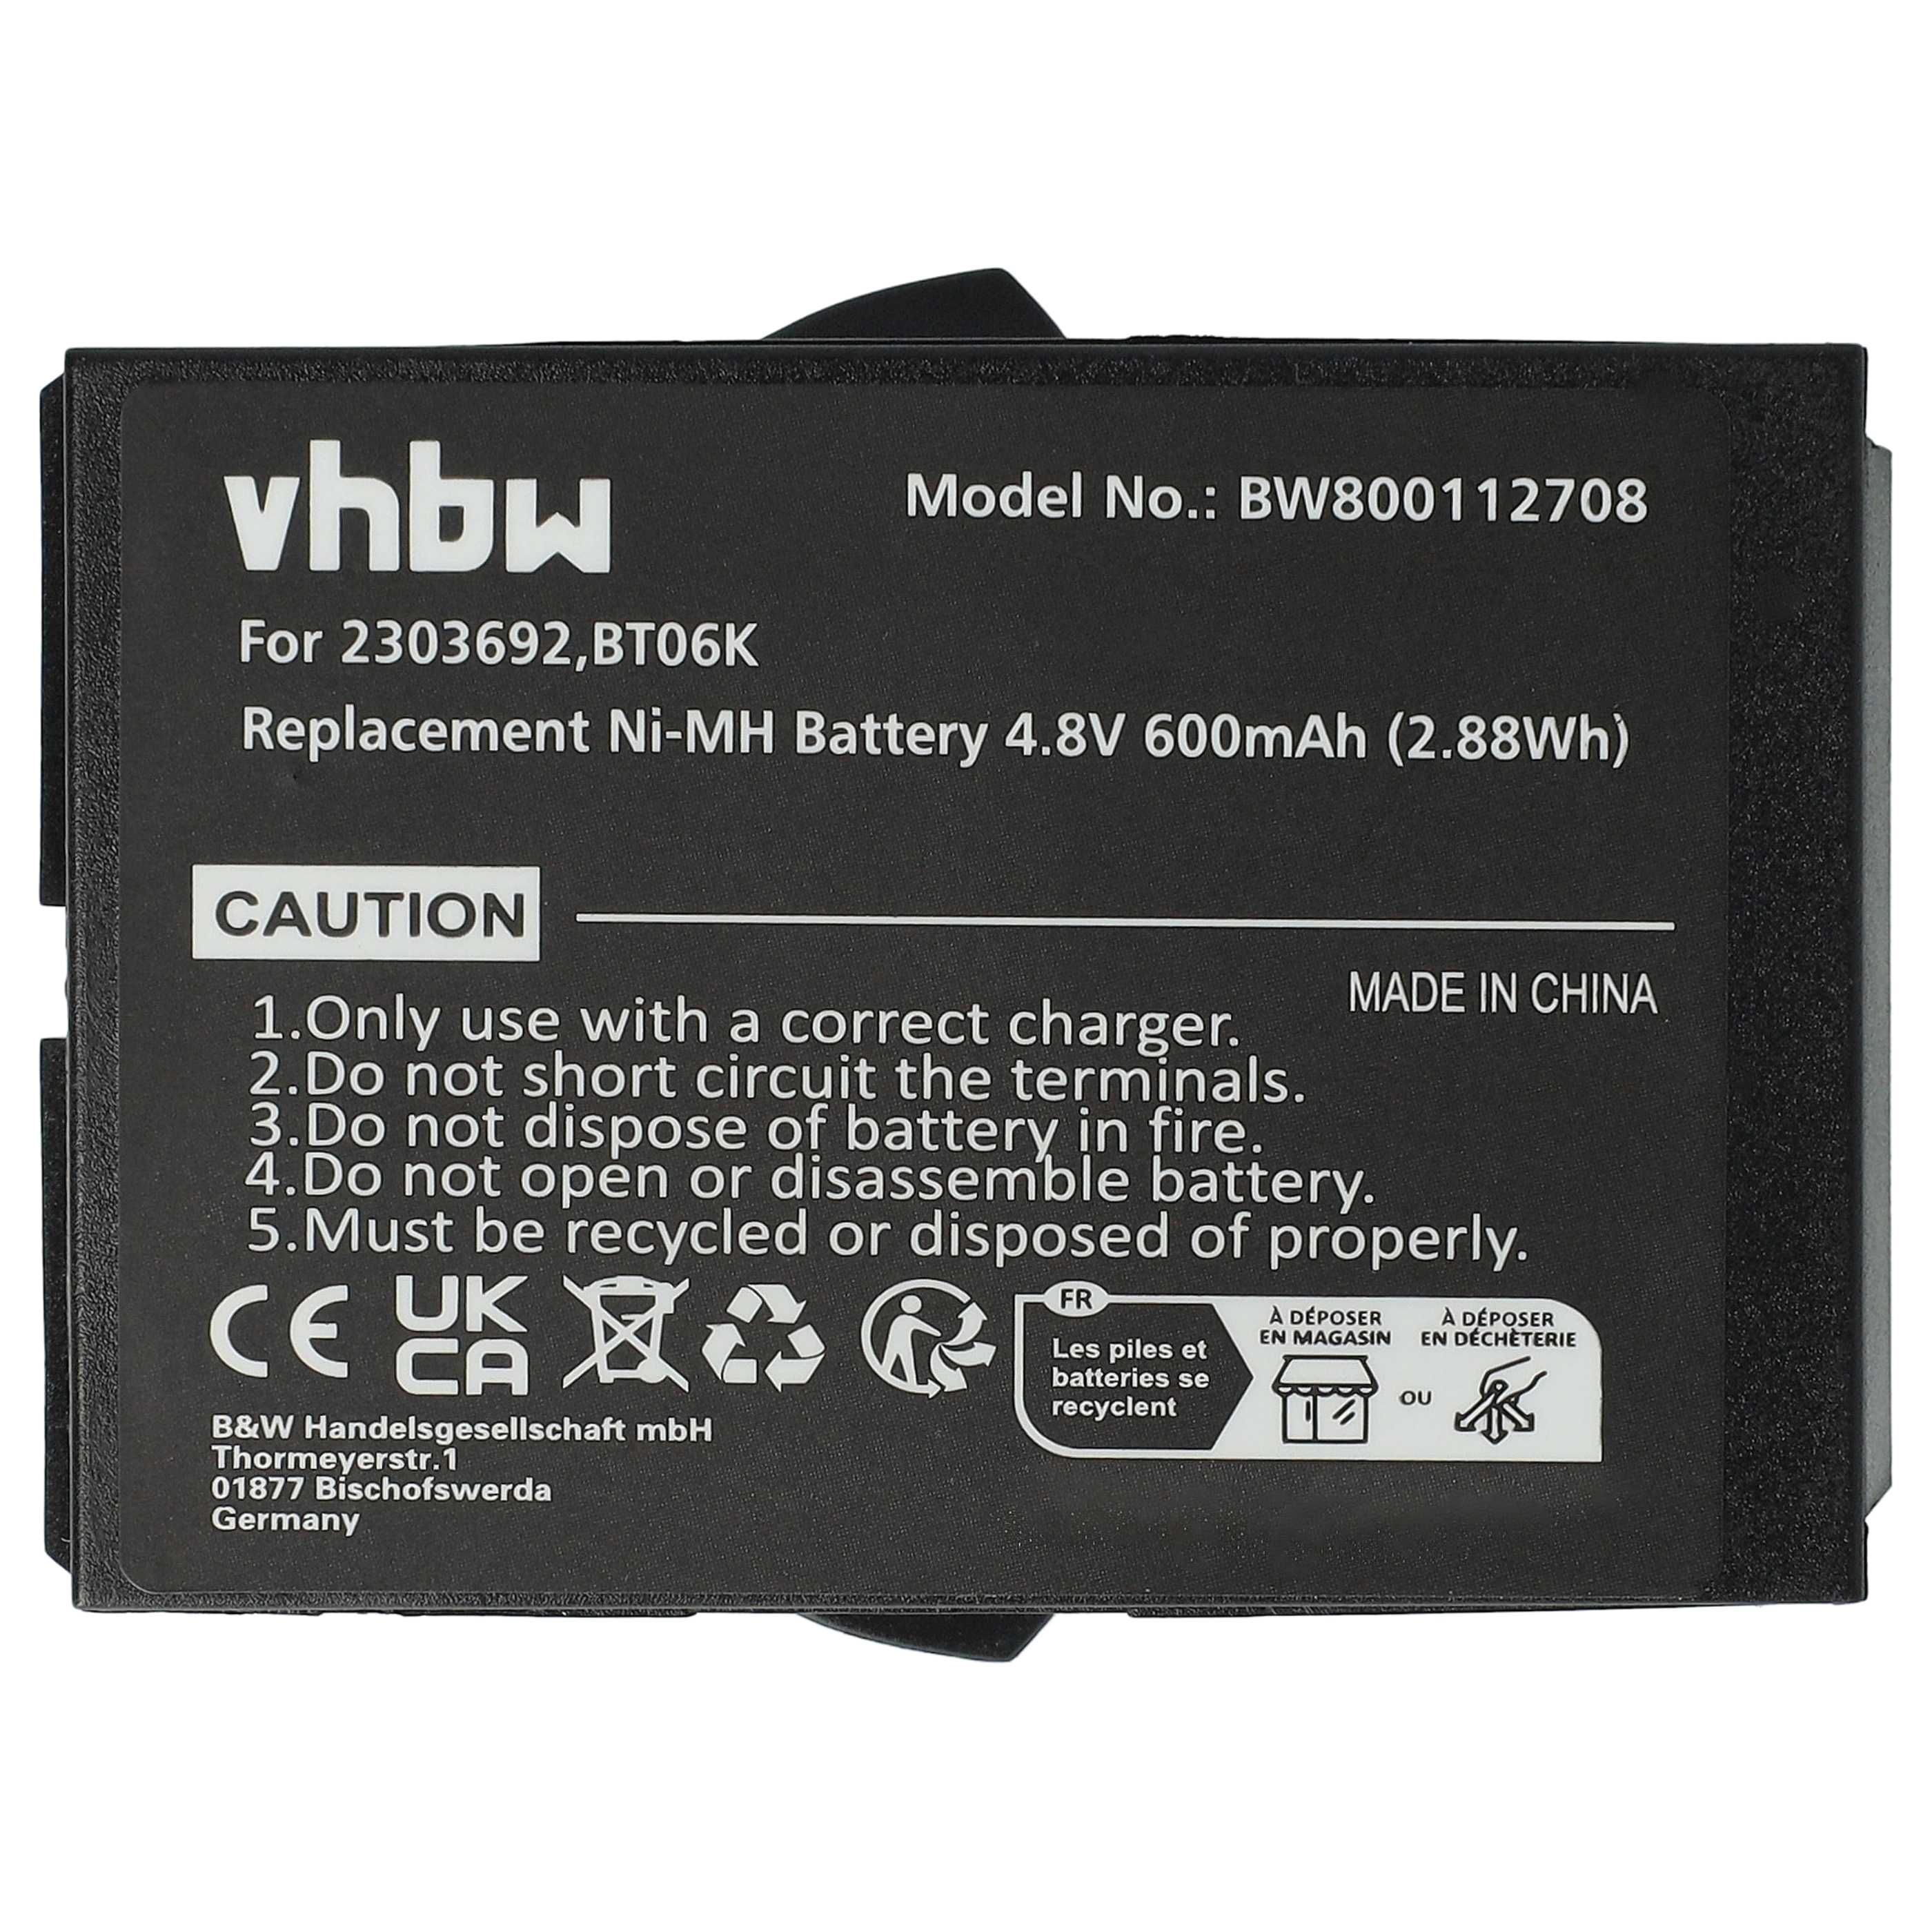 Industrial Remote Control Battery Replacement for Danfoss 2303692, BT06K - 600mAh 4.8V NiMH